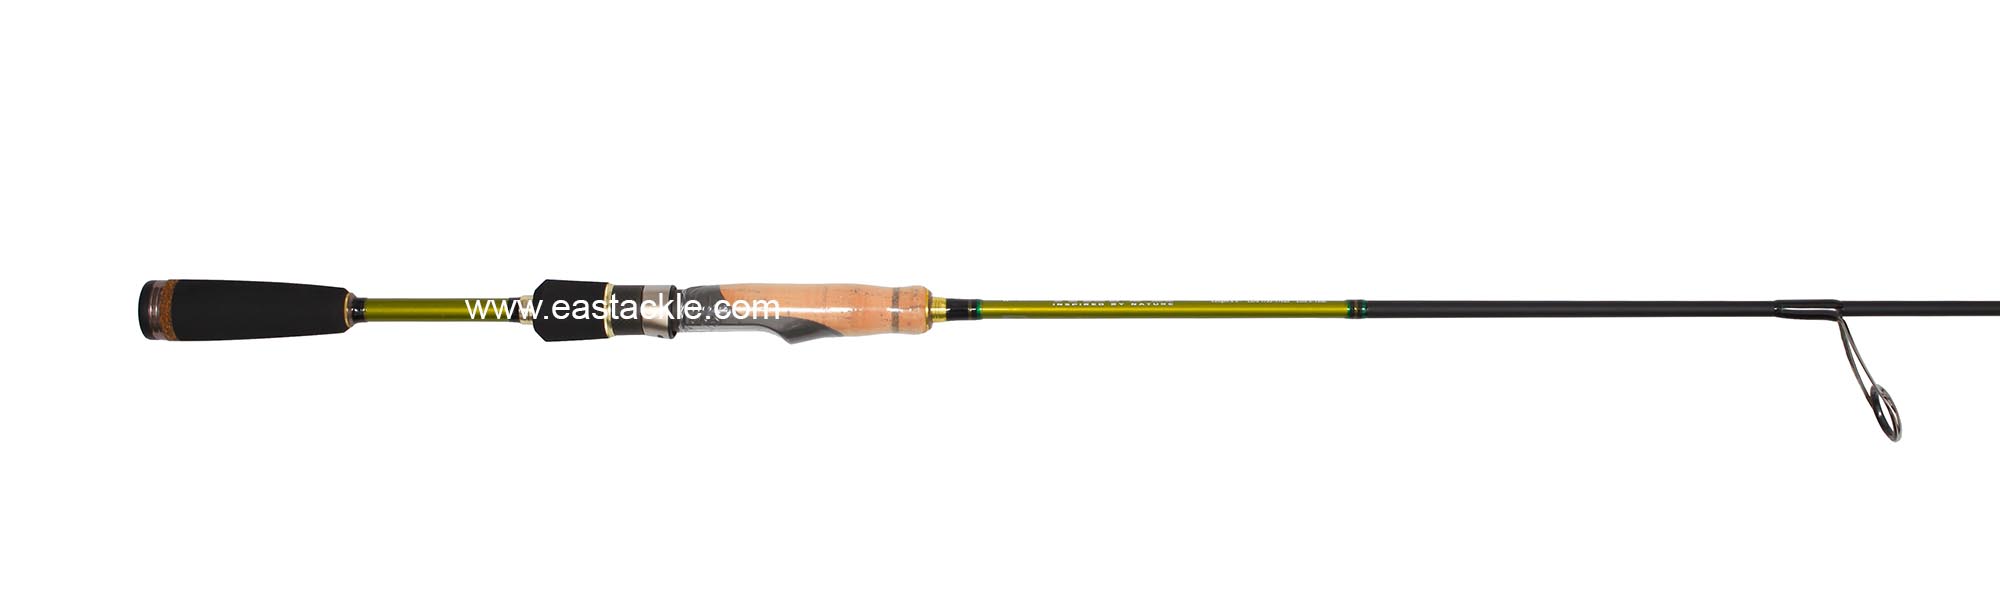 Rapala - Koivu - KVS662MH - Spinning Rod - Butt to Stripper Guide (Side View) | Eastackle